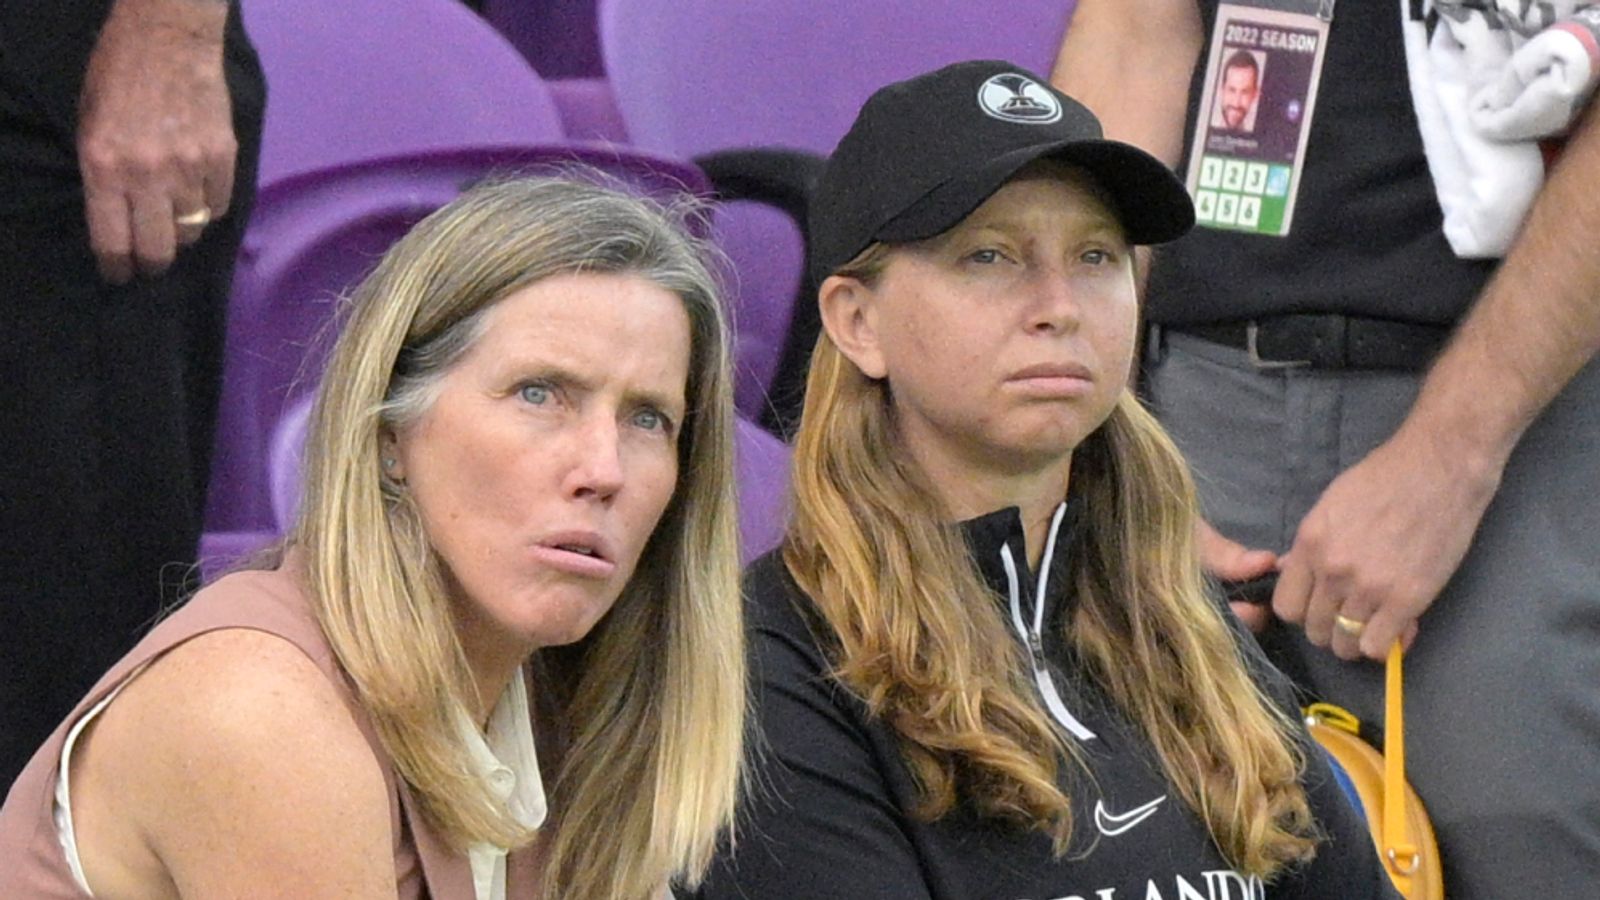 Orlando Pride coaches fired by NWSL following allegations of verbal abuse, favouritism and retaliatory behaviour